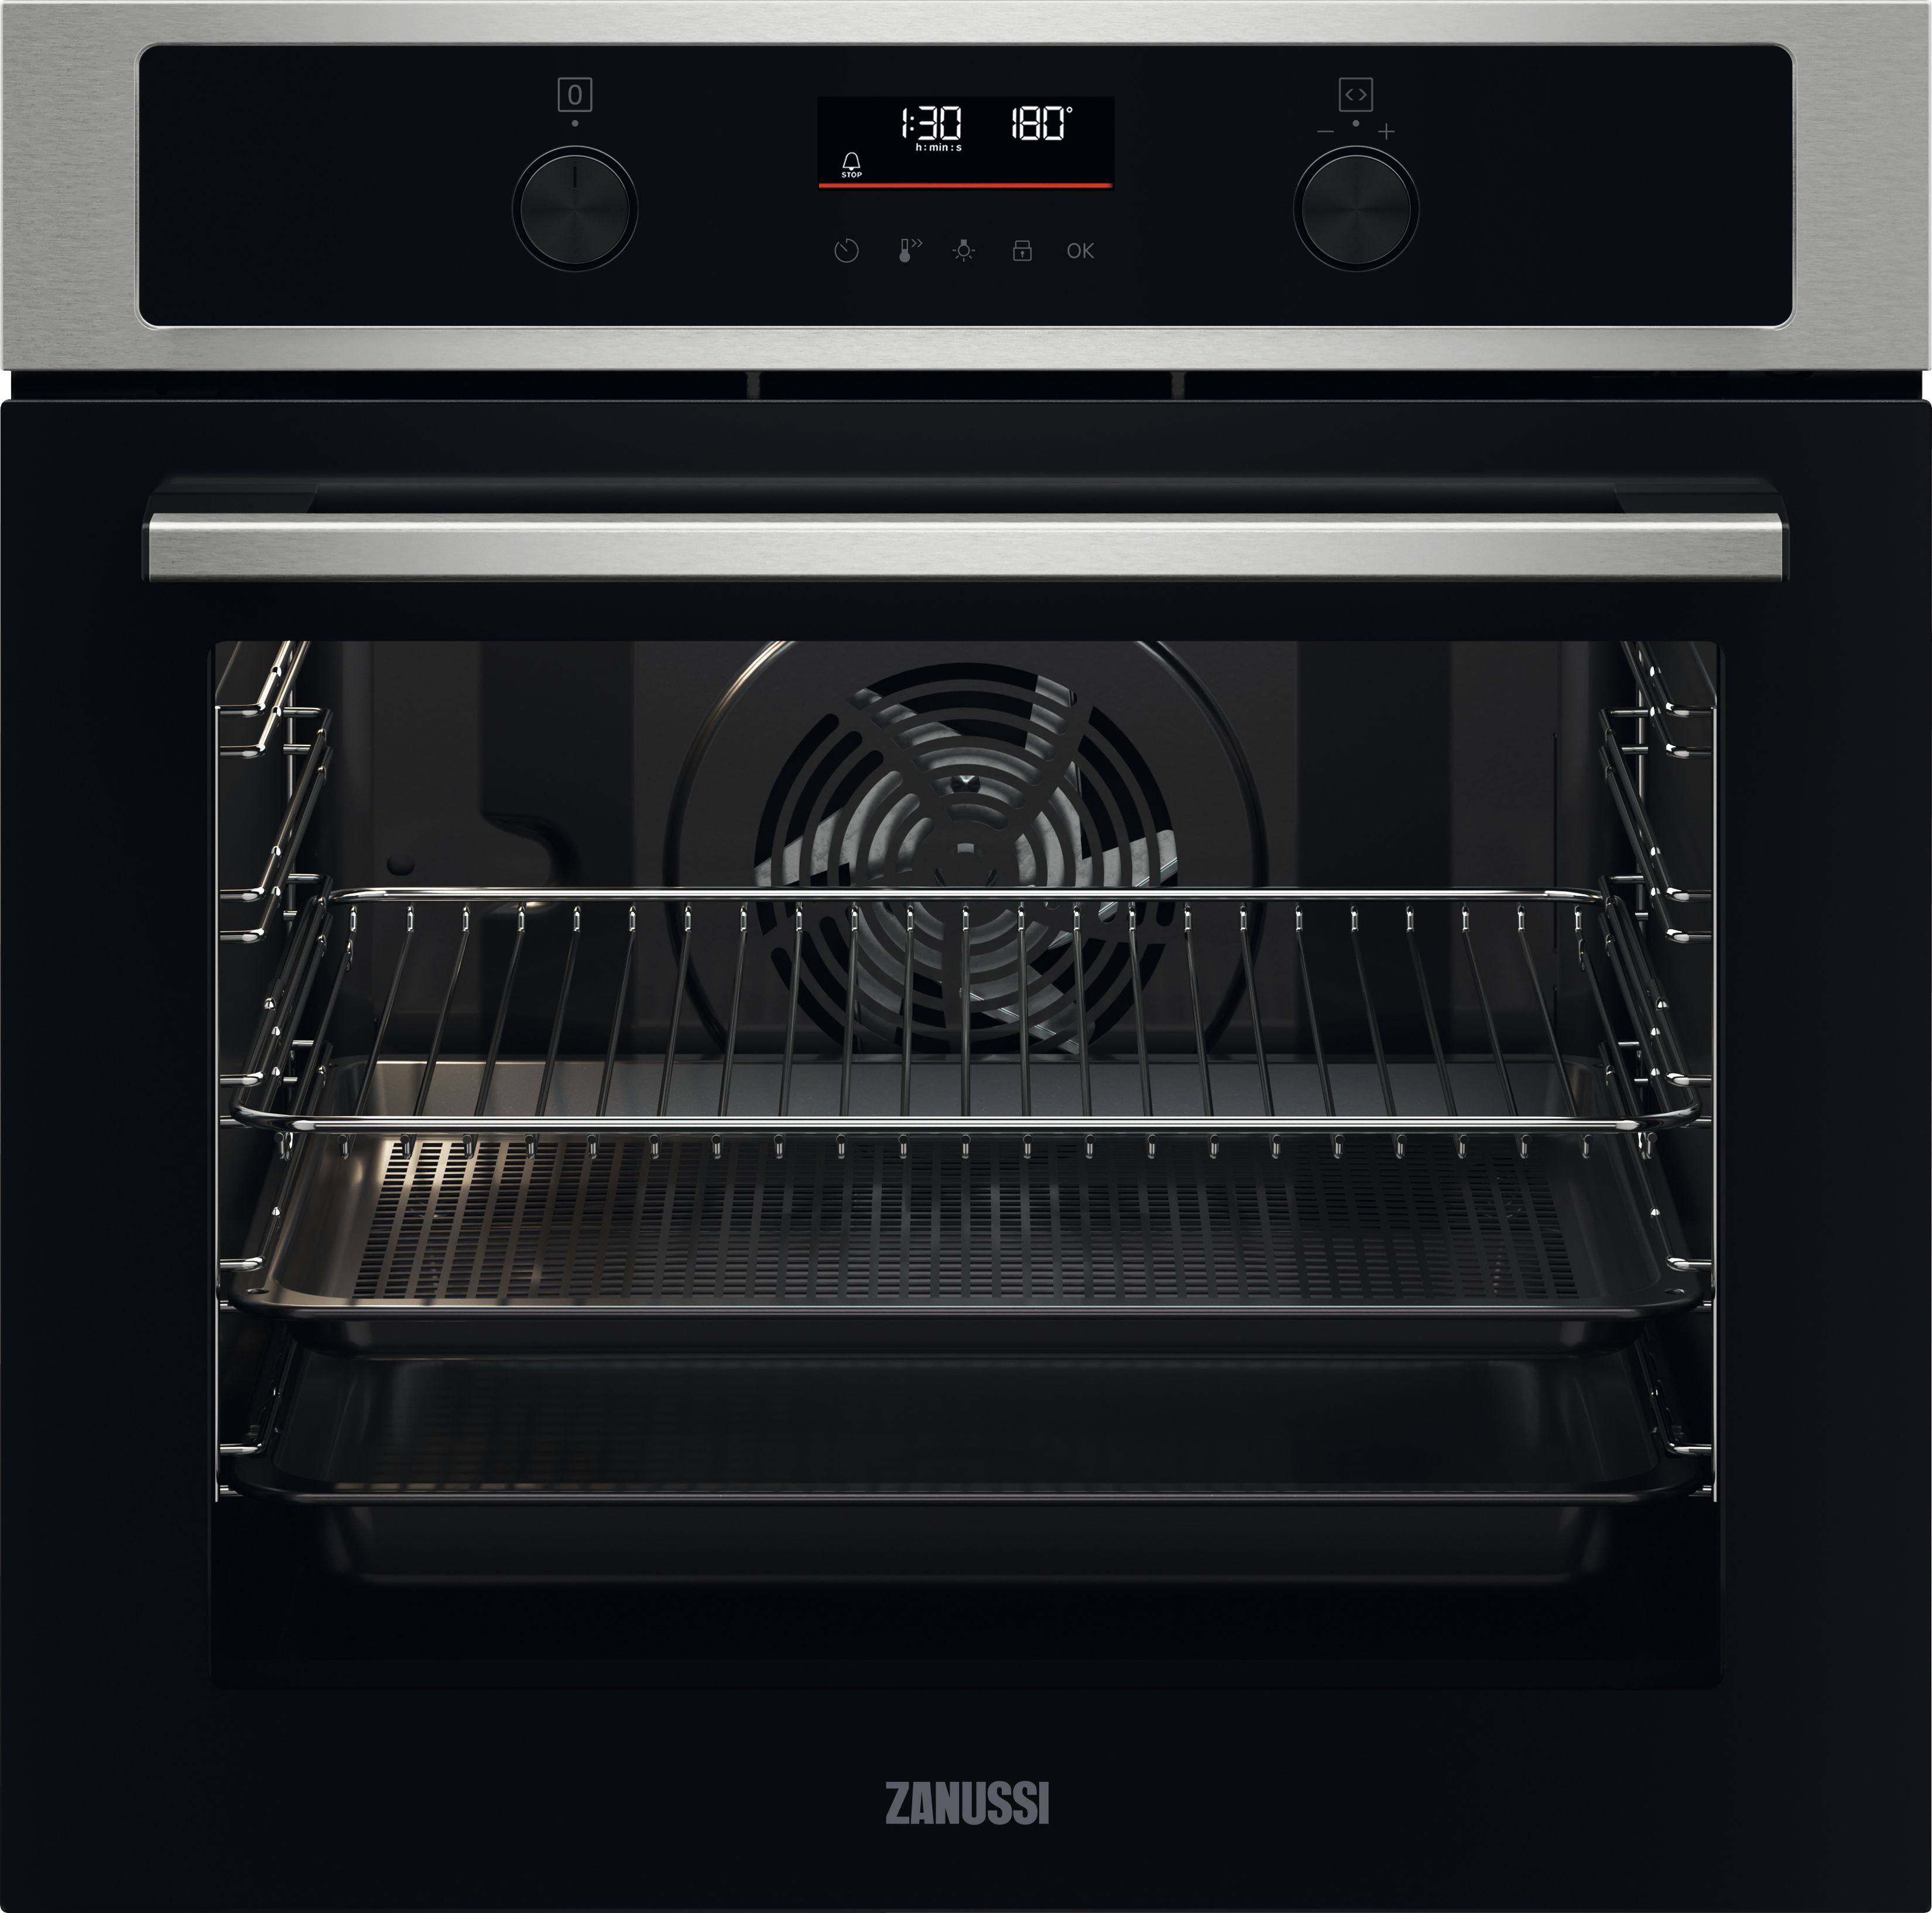 Zanussi ZOPNA7XN Built In Electric Single Oven and Pyrolytic Cleaning - Stainless Steel / Black - A+ Rated, Stainless Steel